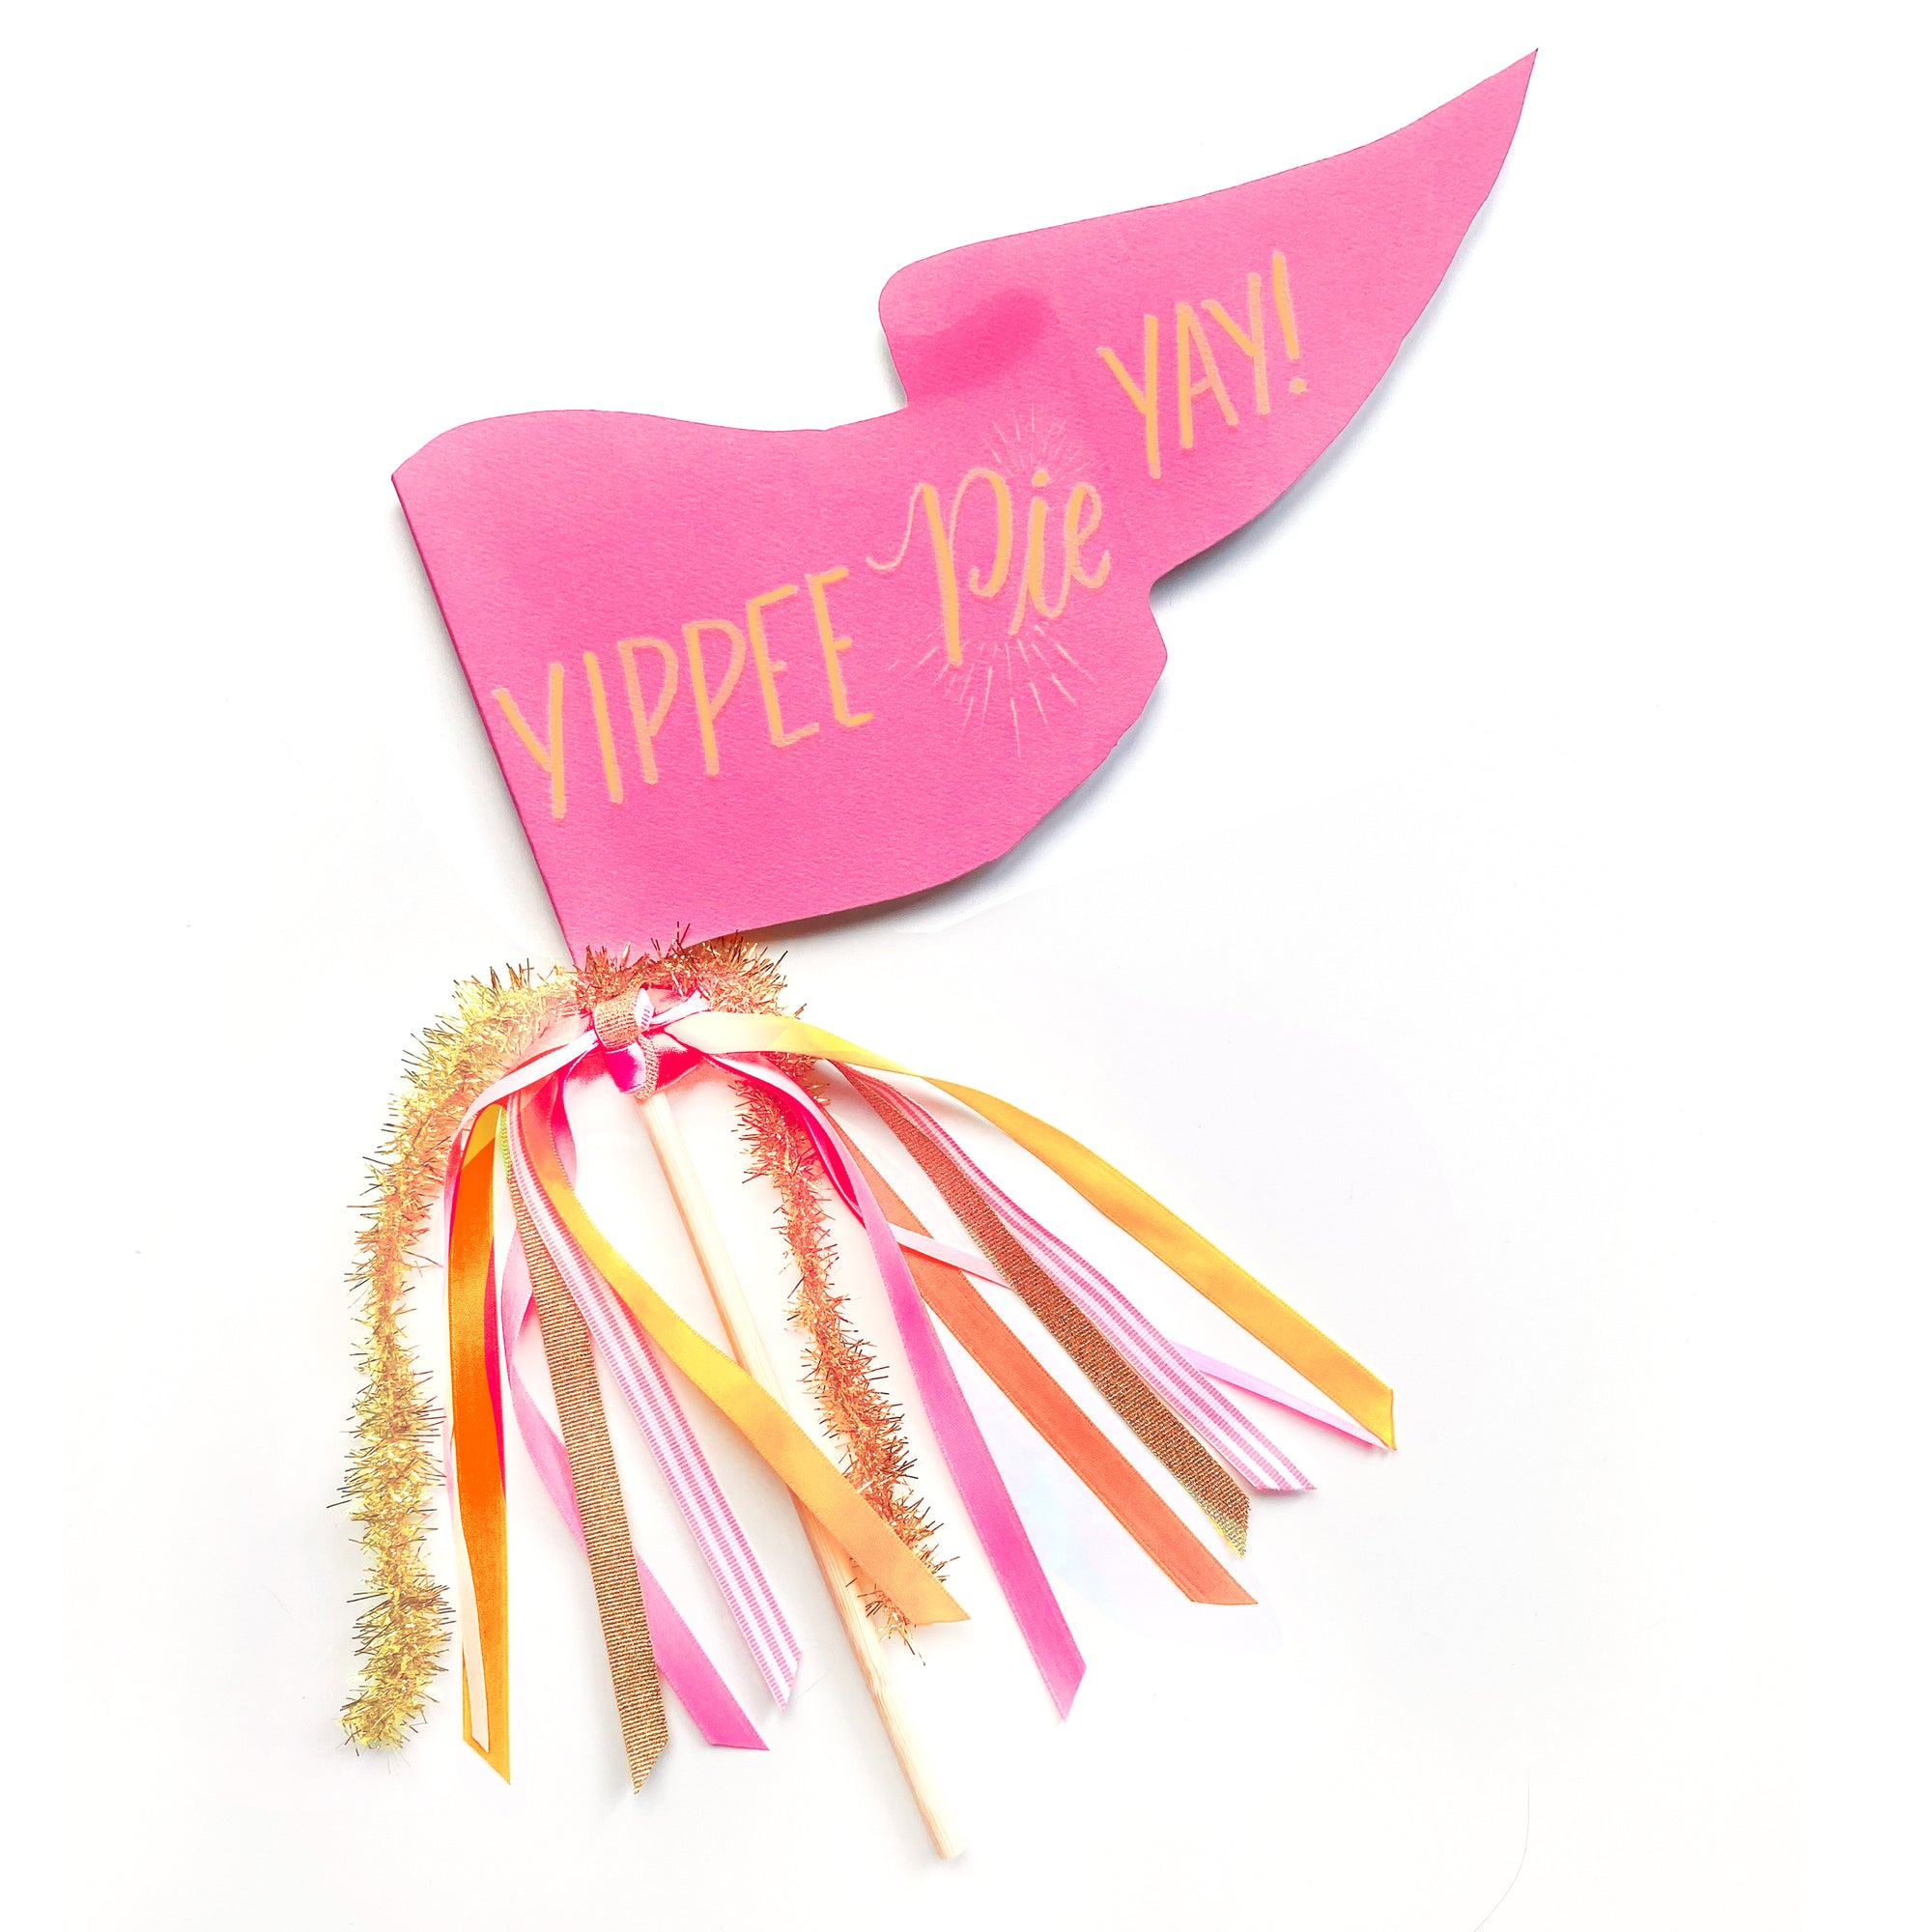 Yippie Pie Yay Party Pennant